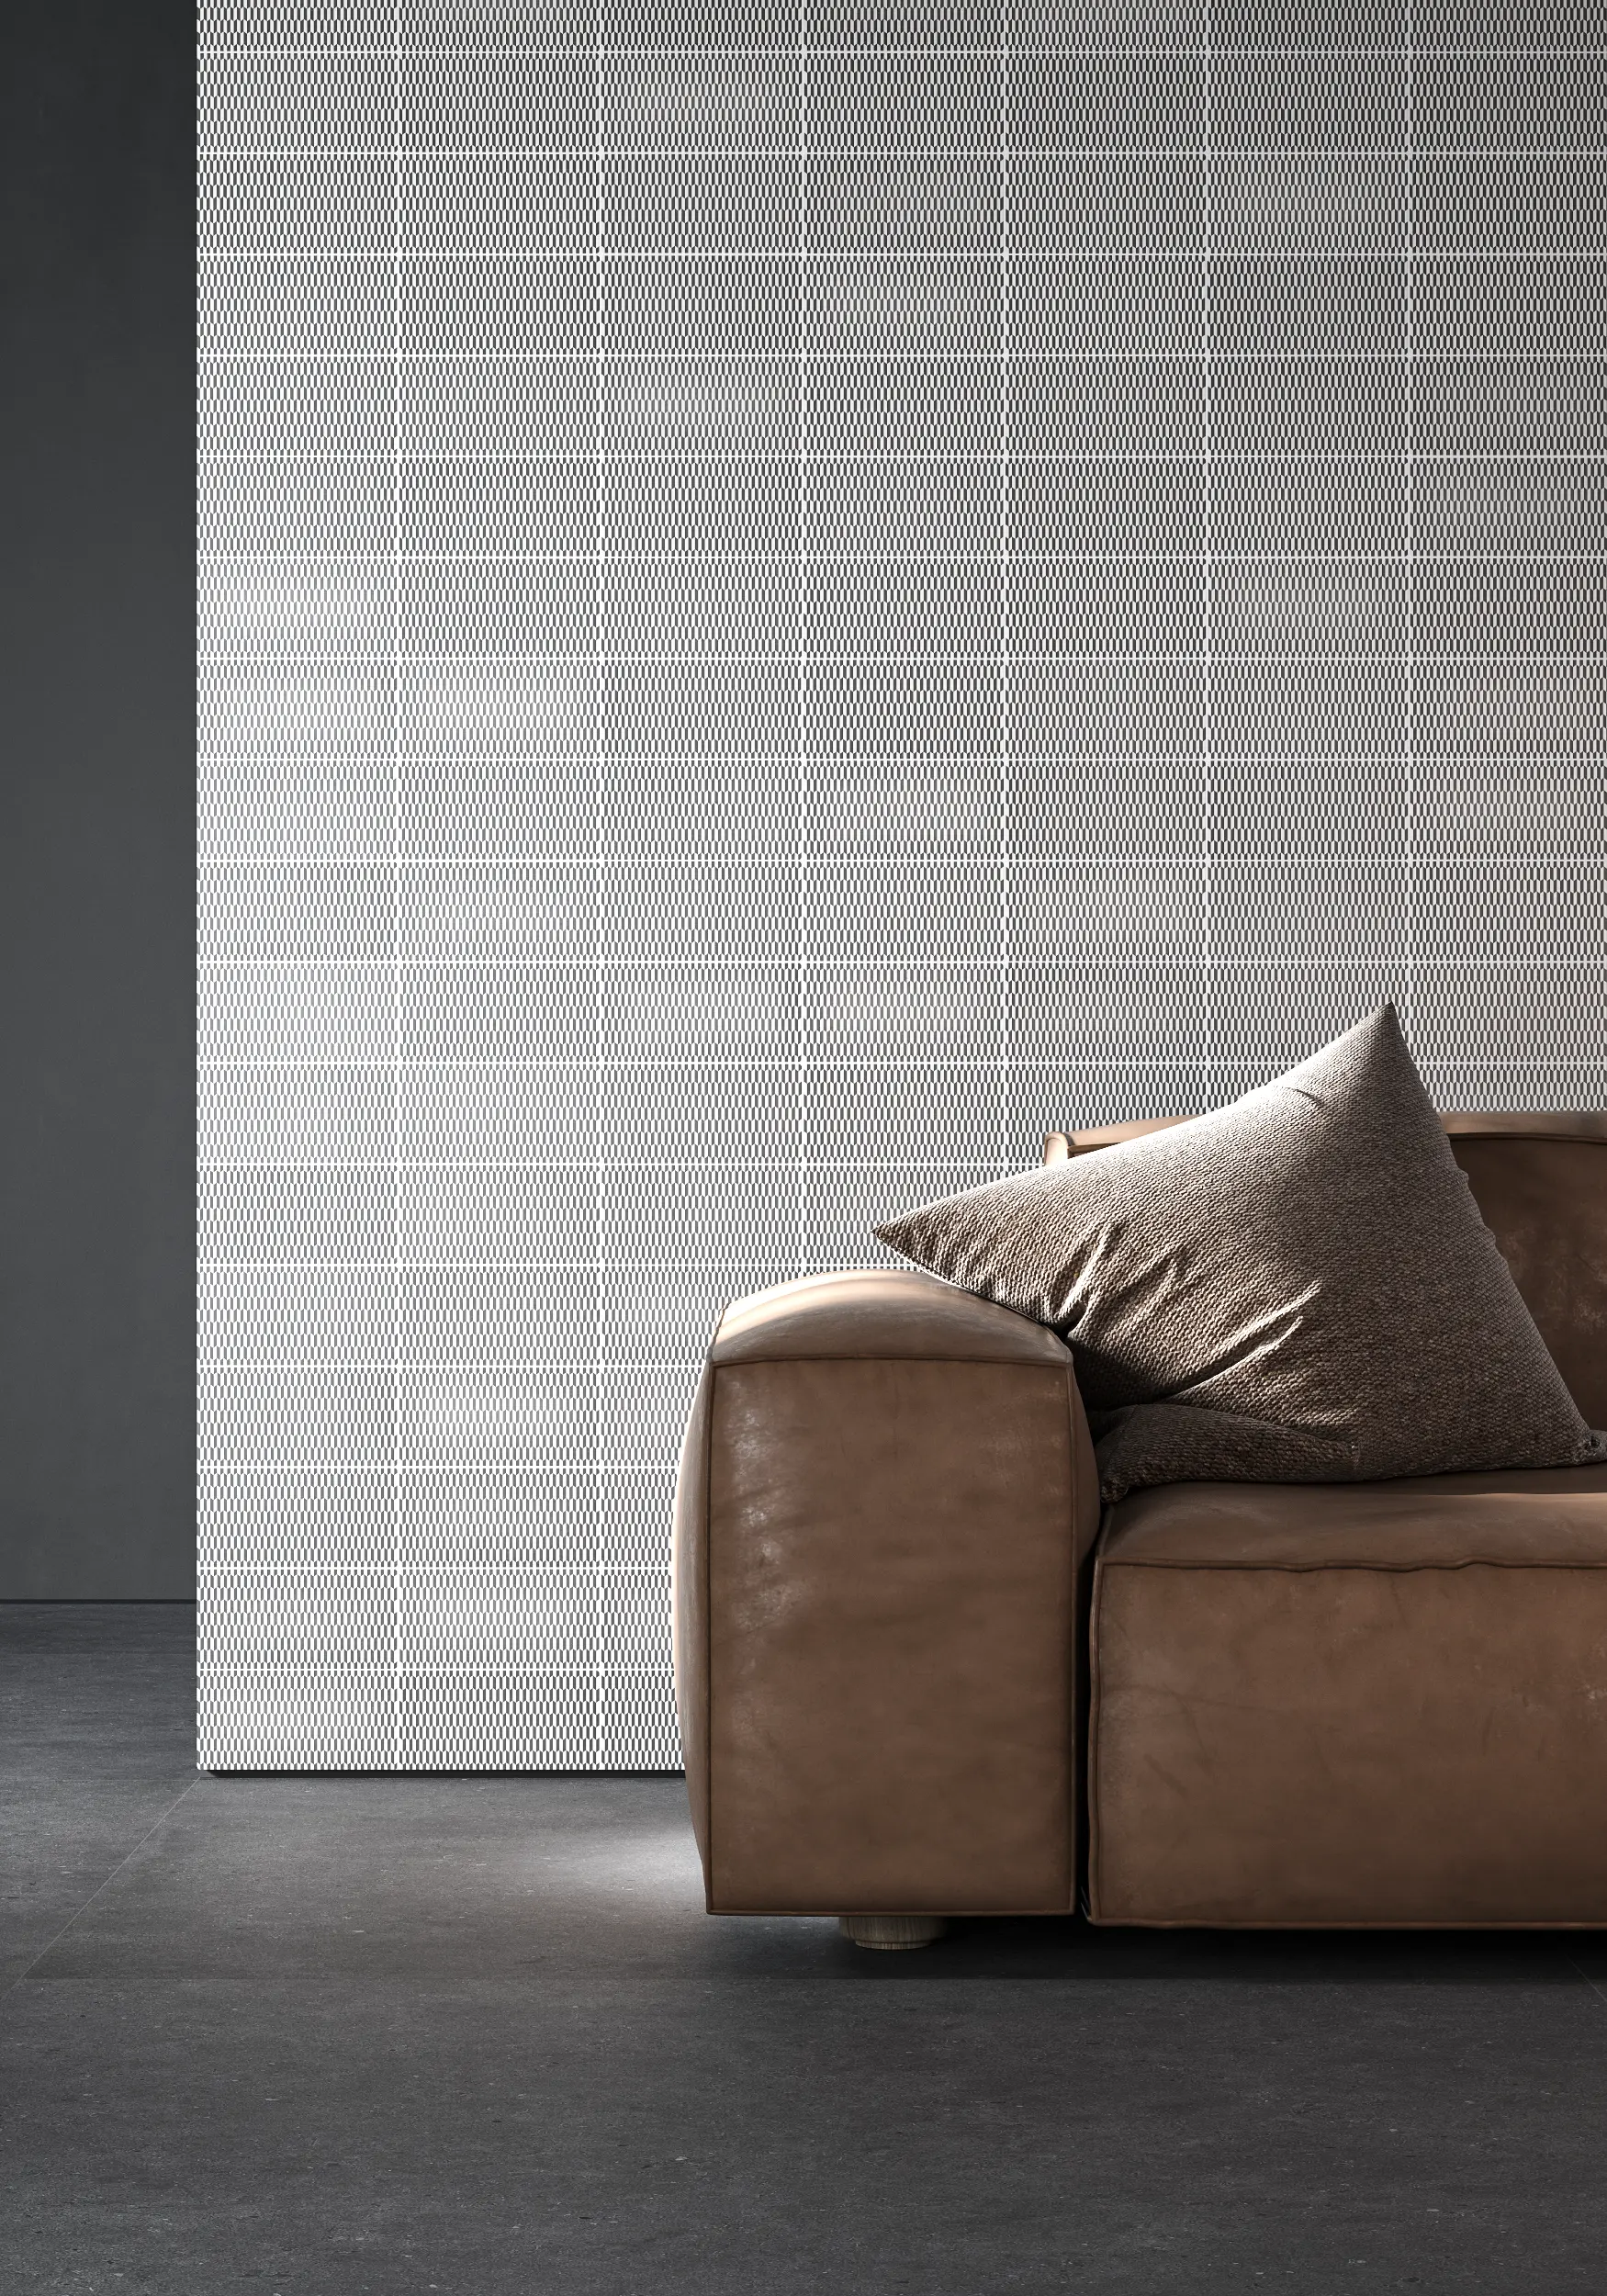 Living room wall with white concrete tiles in 10x20 cm - Arena collection